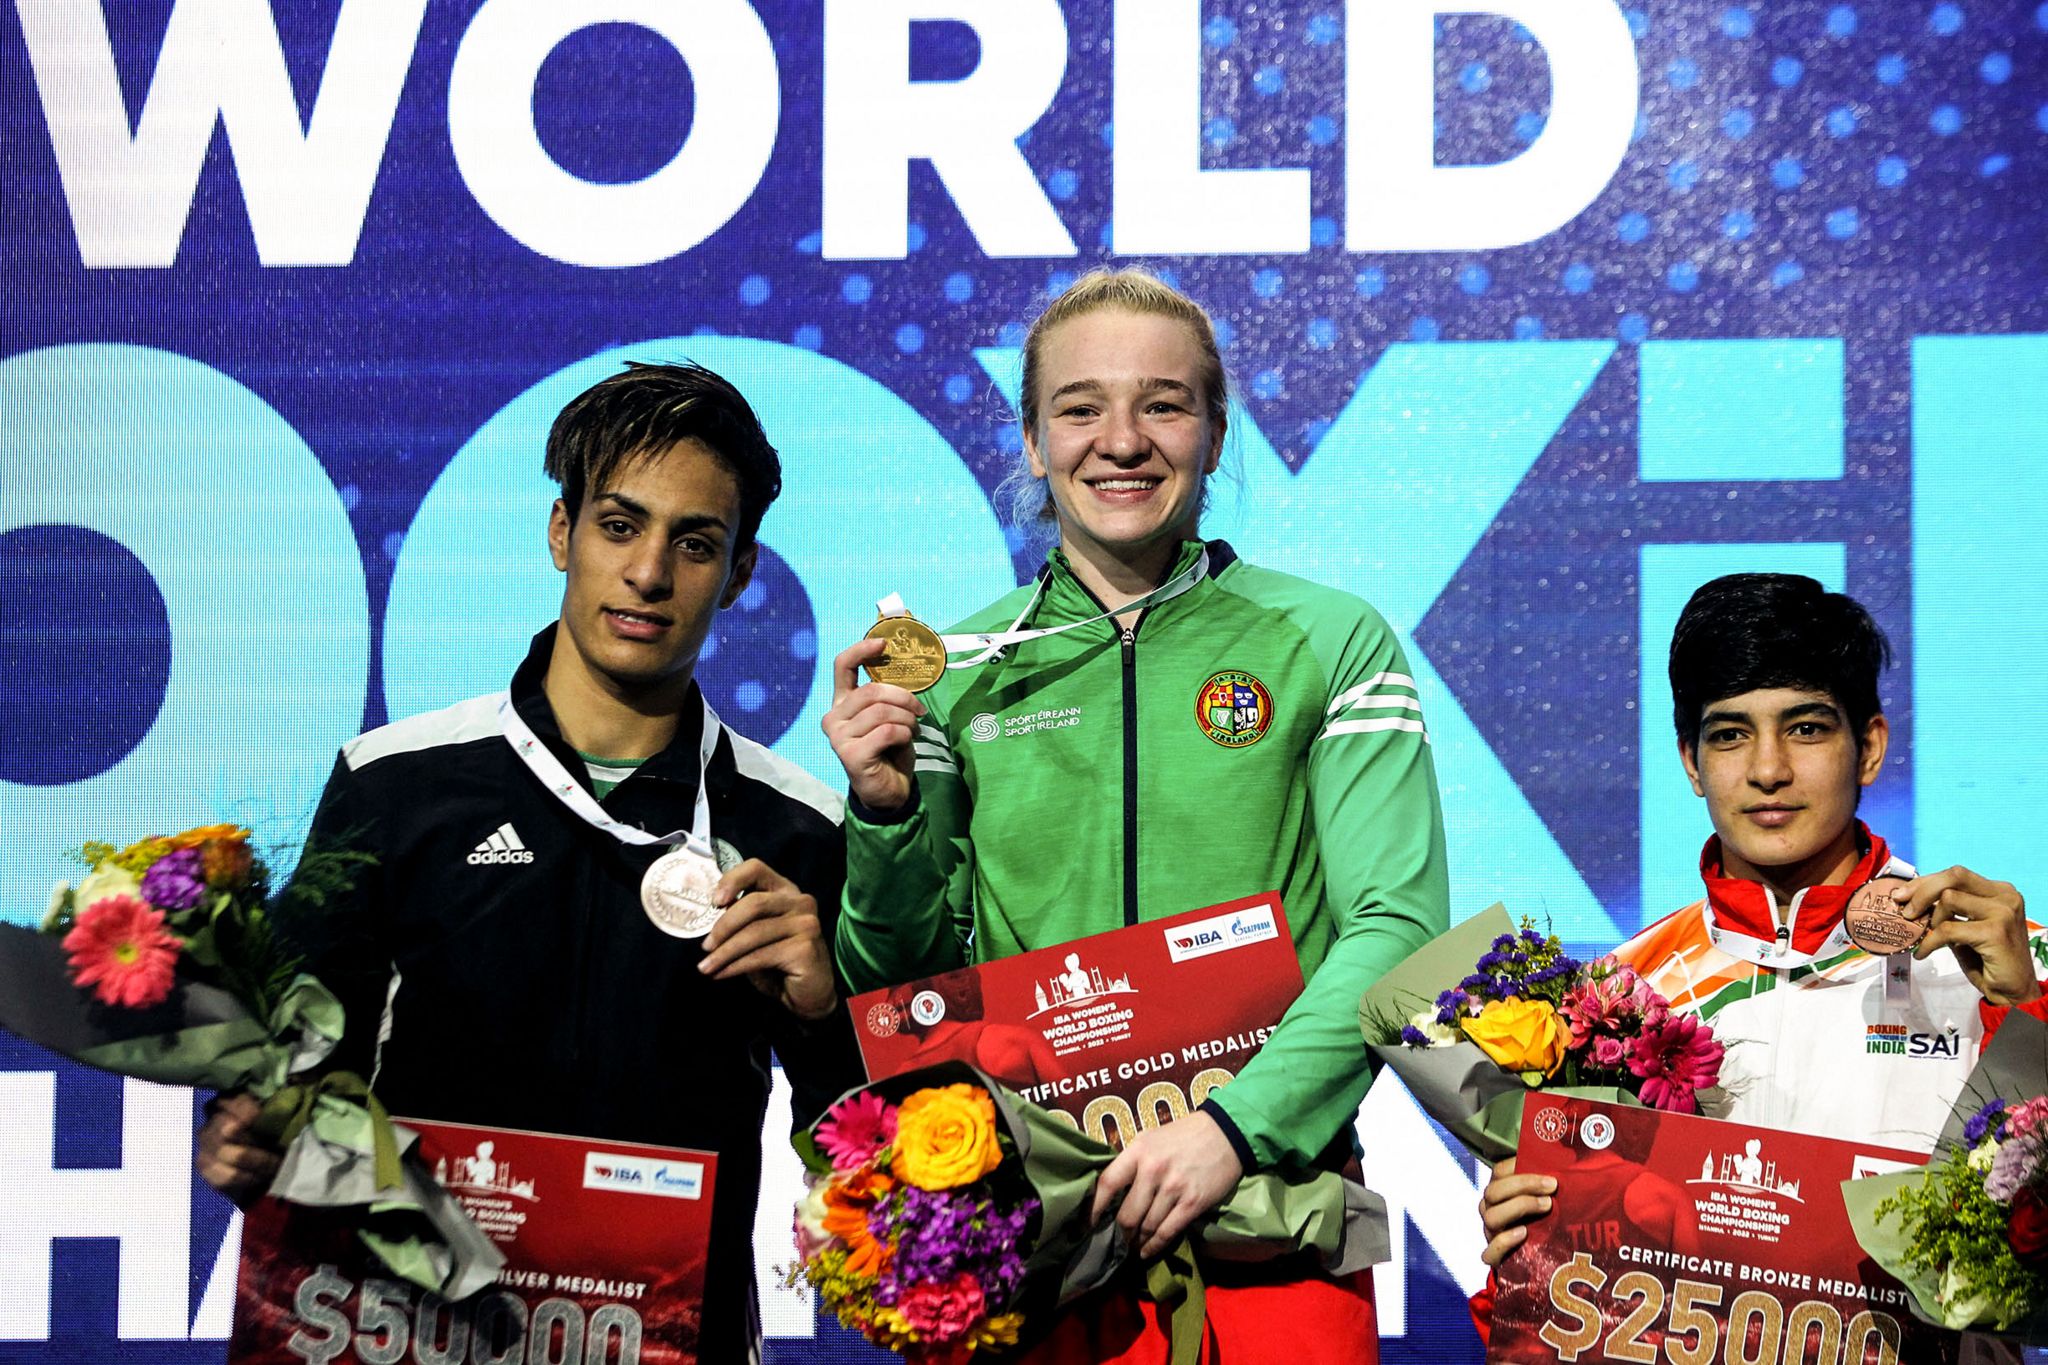 Algeria's Imane Khelif with the silver medal, Ireland's Amy Broadhurst with the gold medal and Parveen of India with the bronze medal